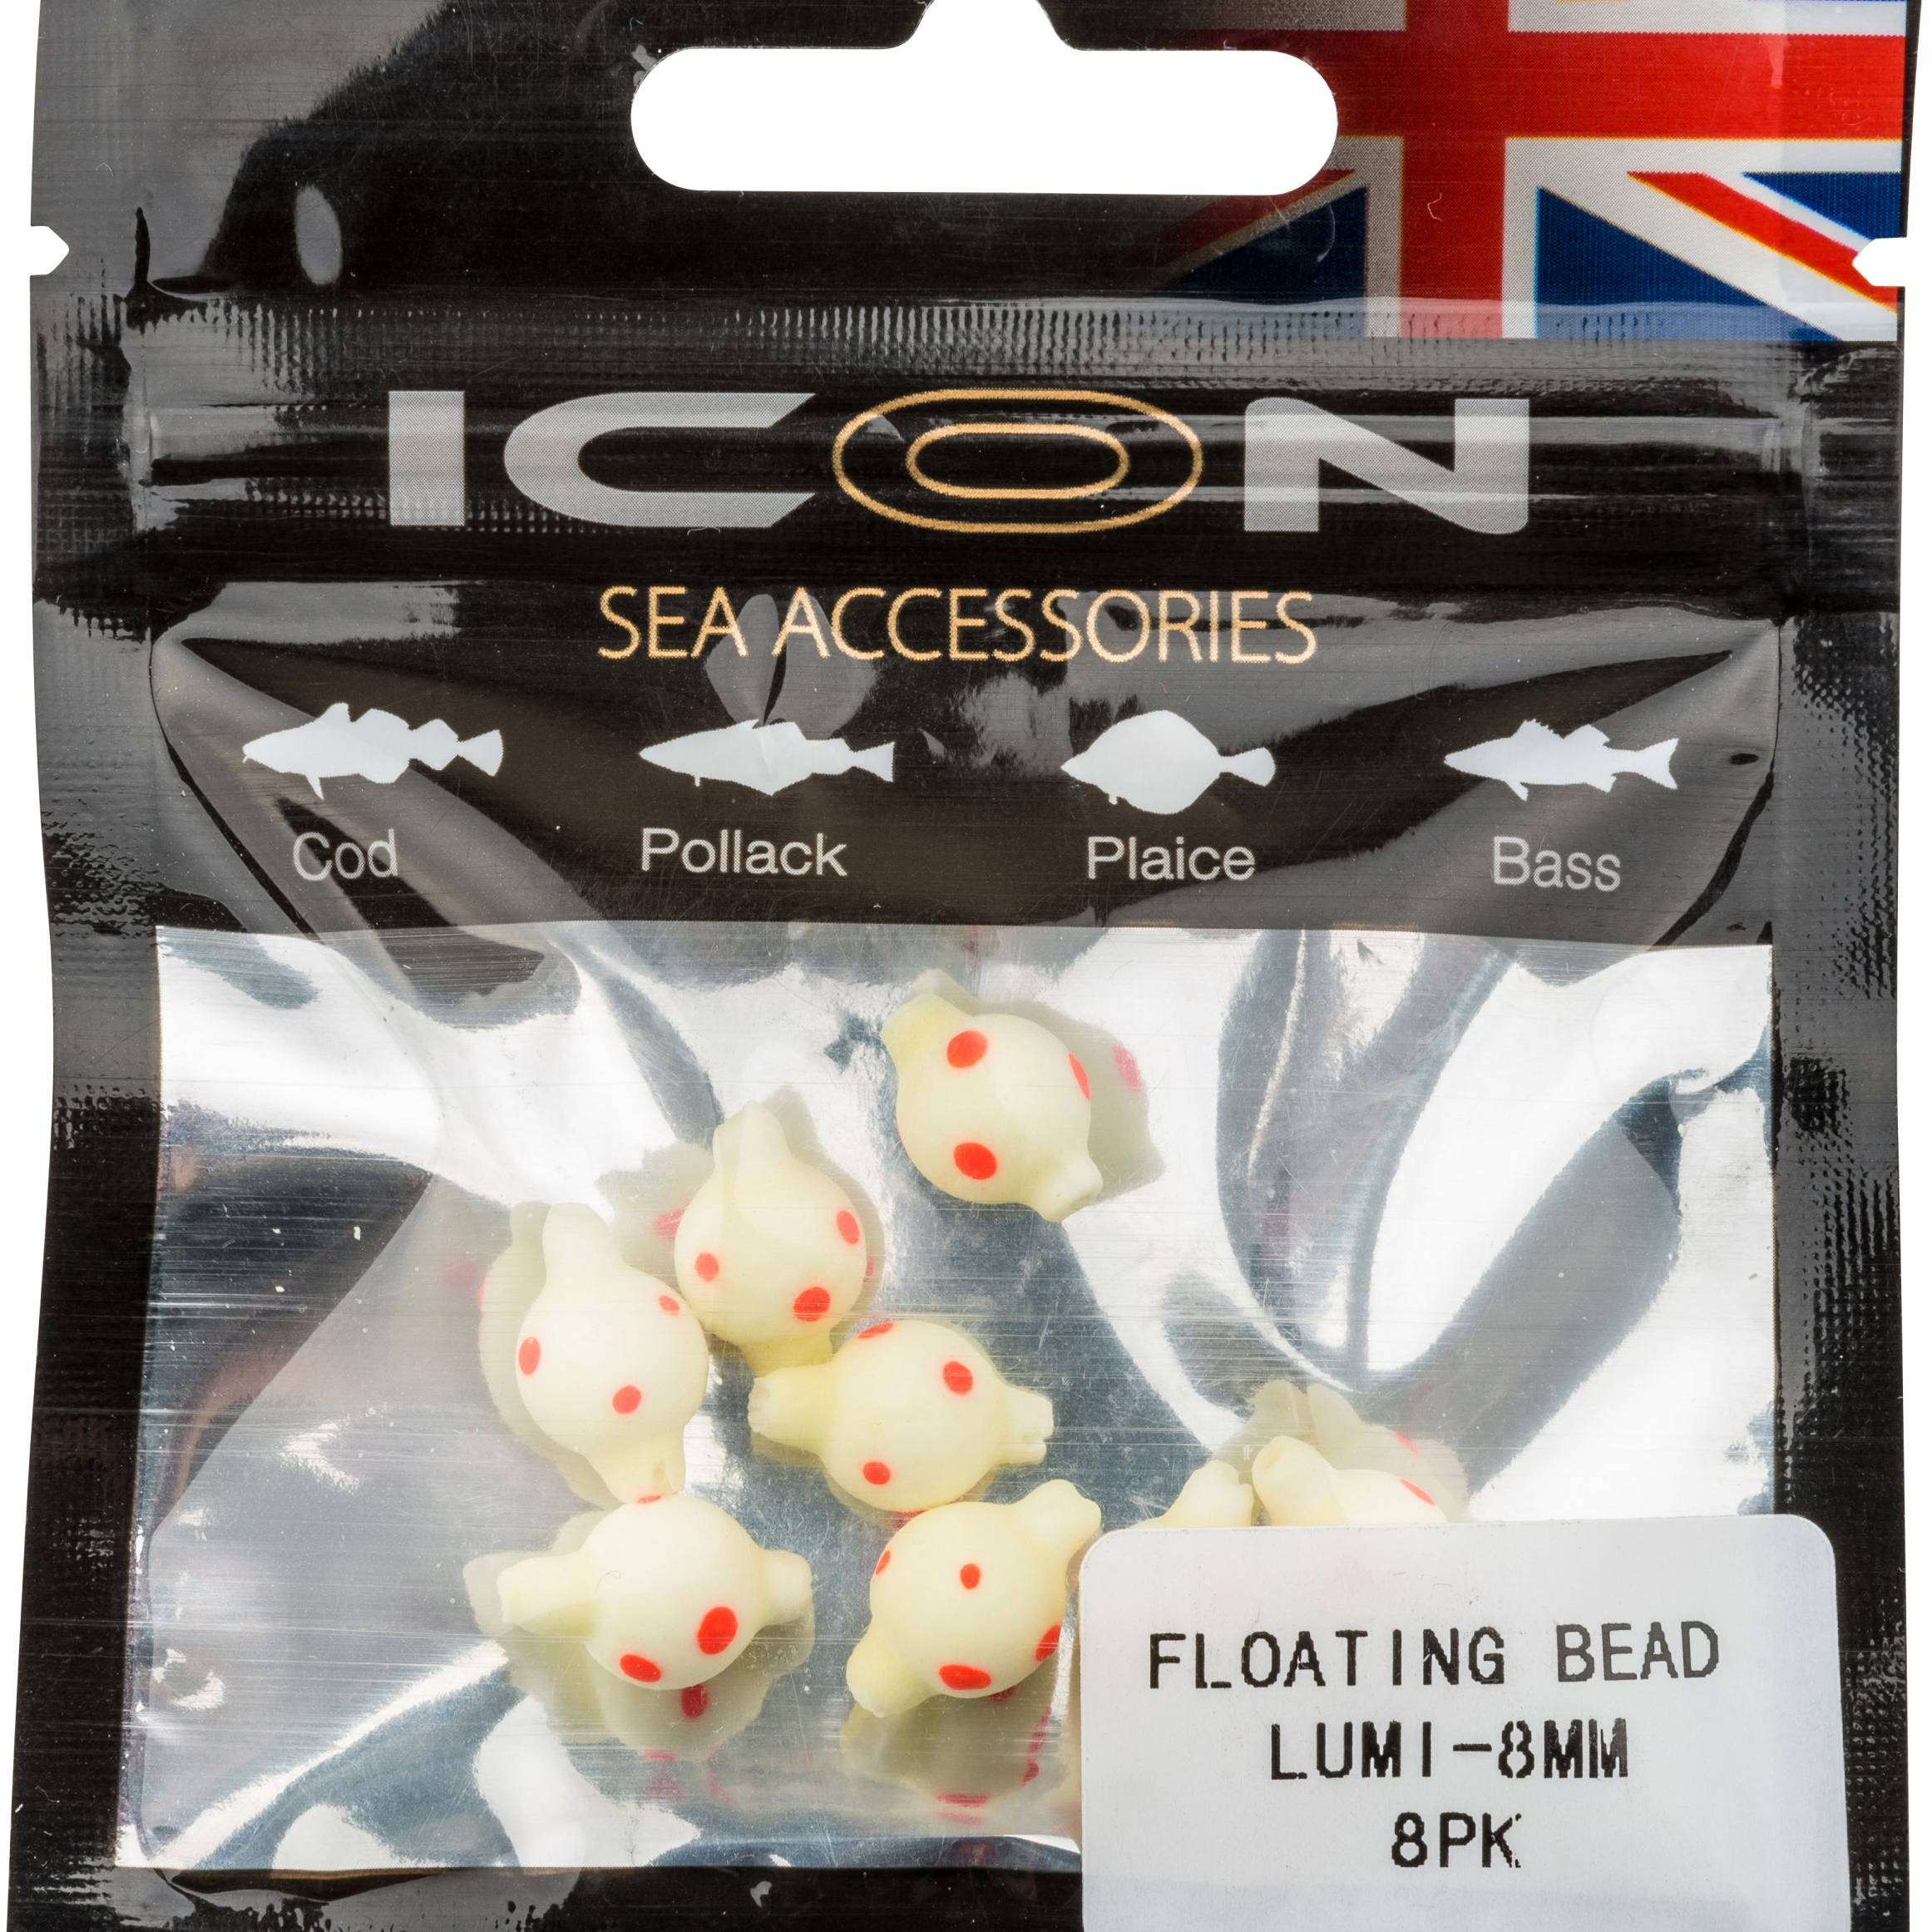 ICON Floating Bead 8mm 8pk